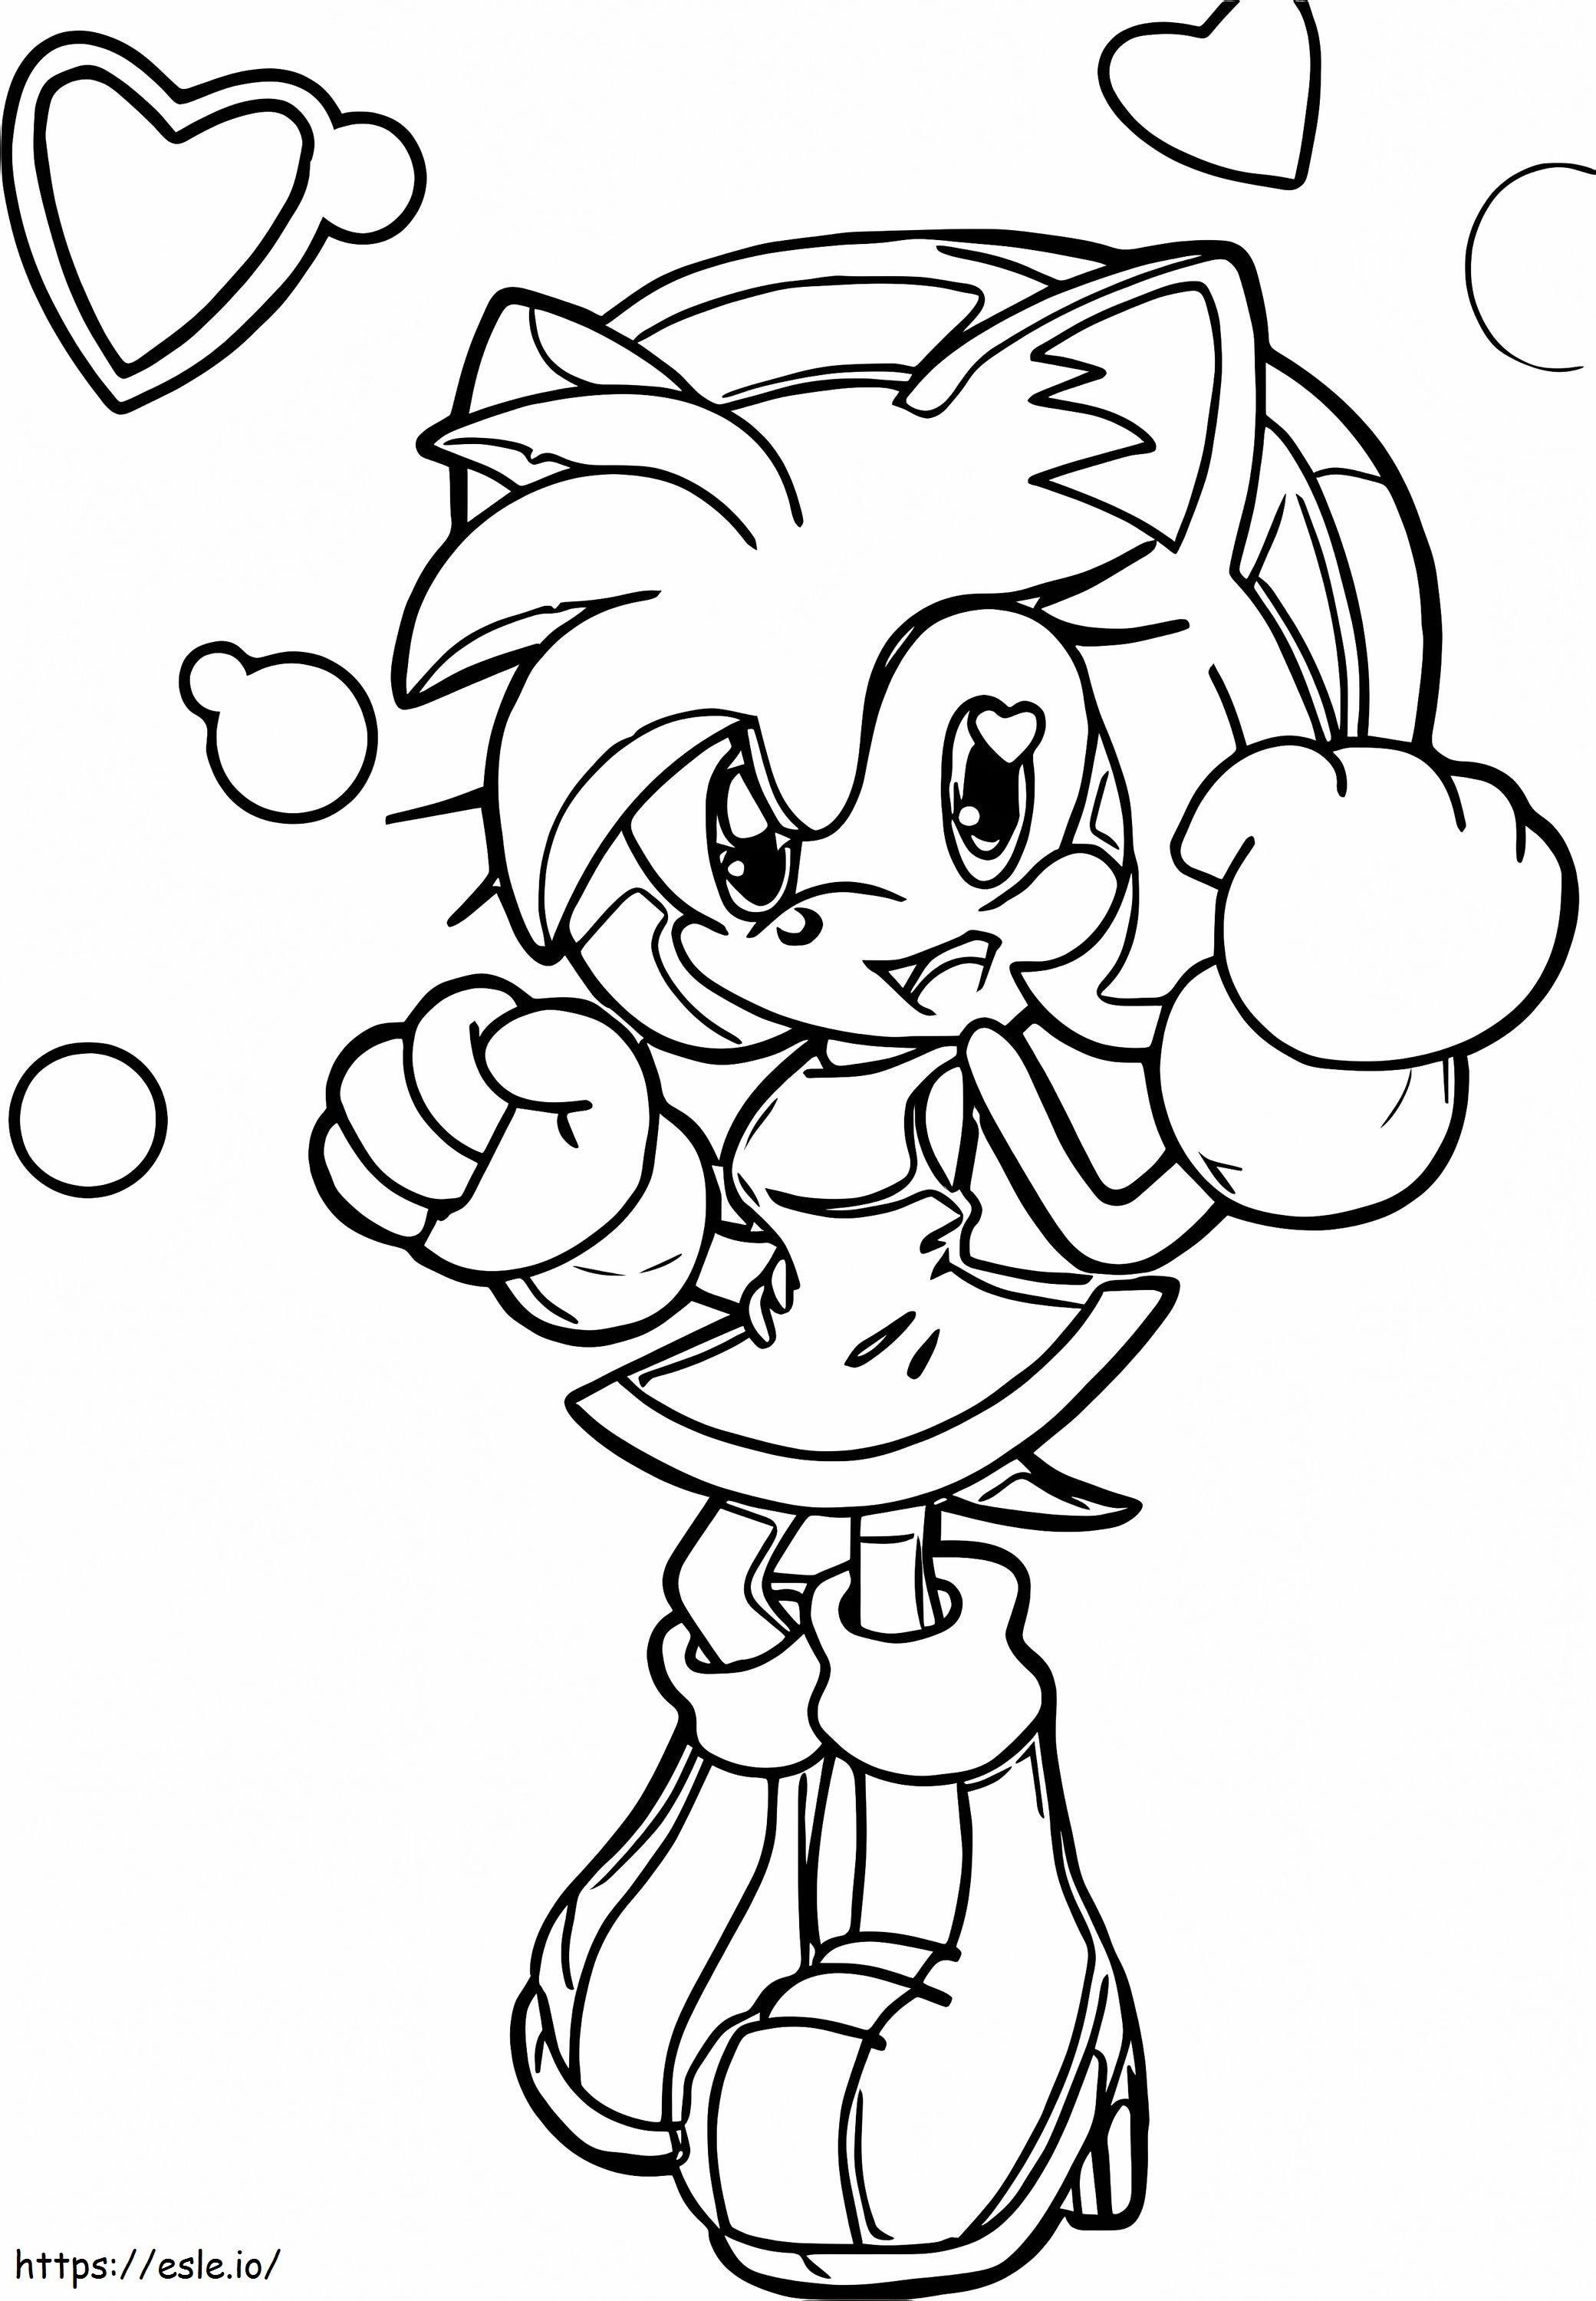 Pretty Amy Rose coloring page